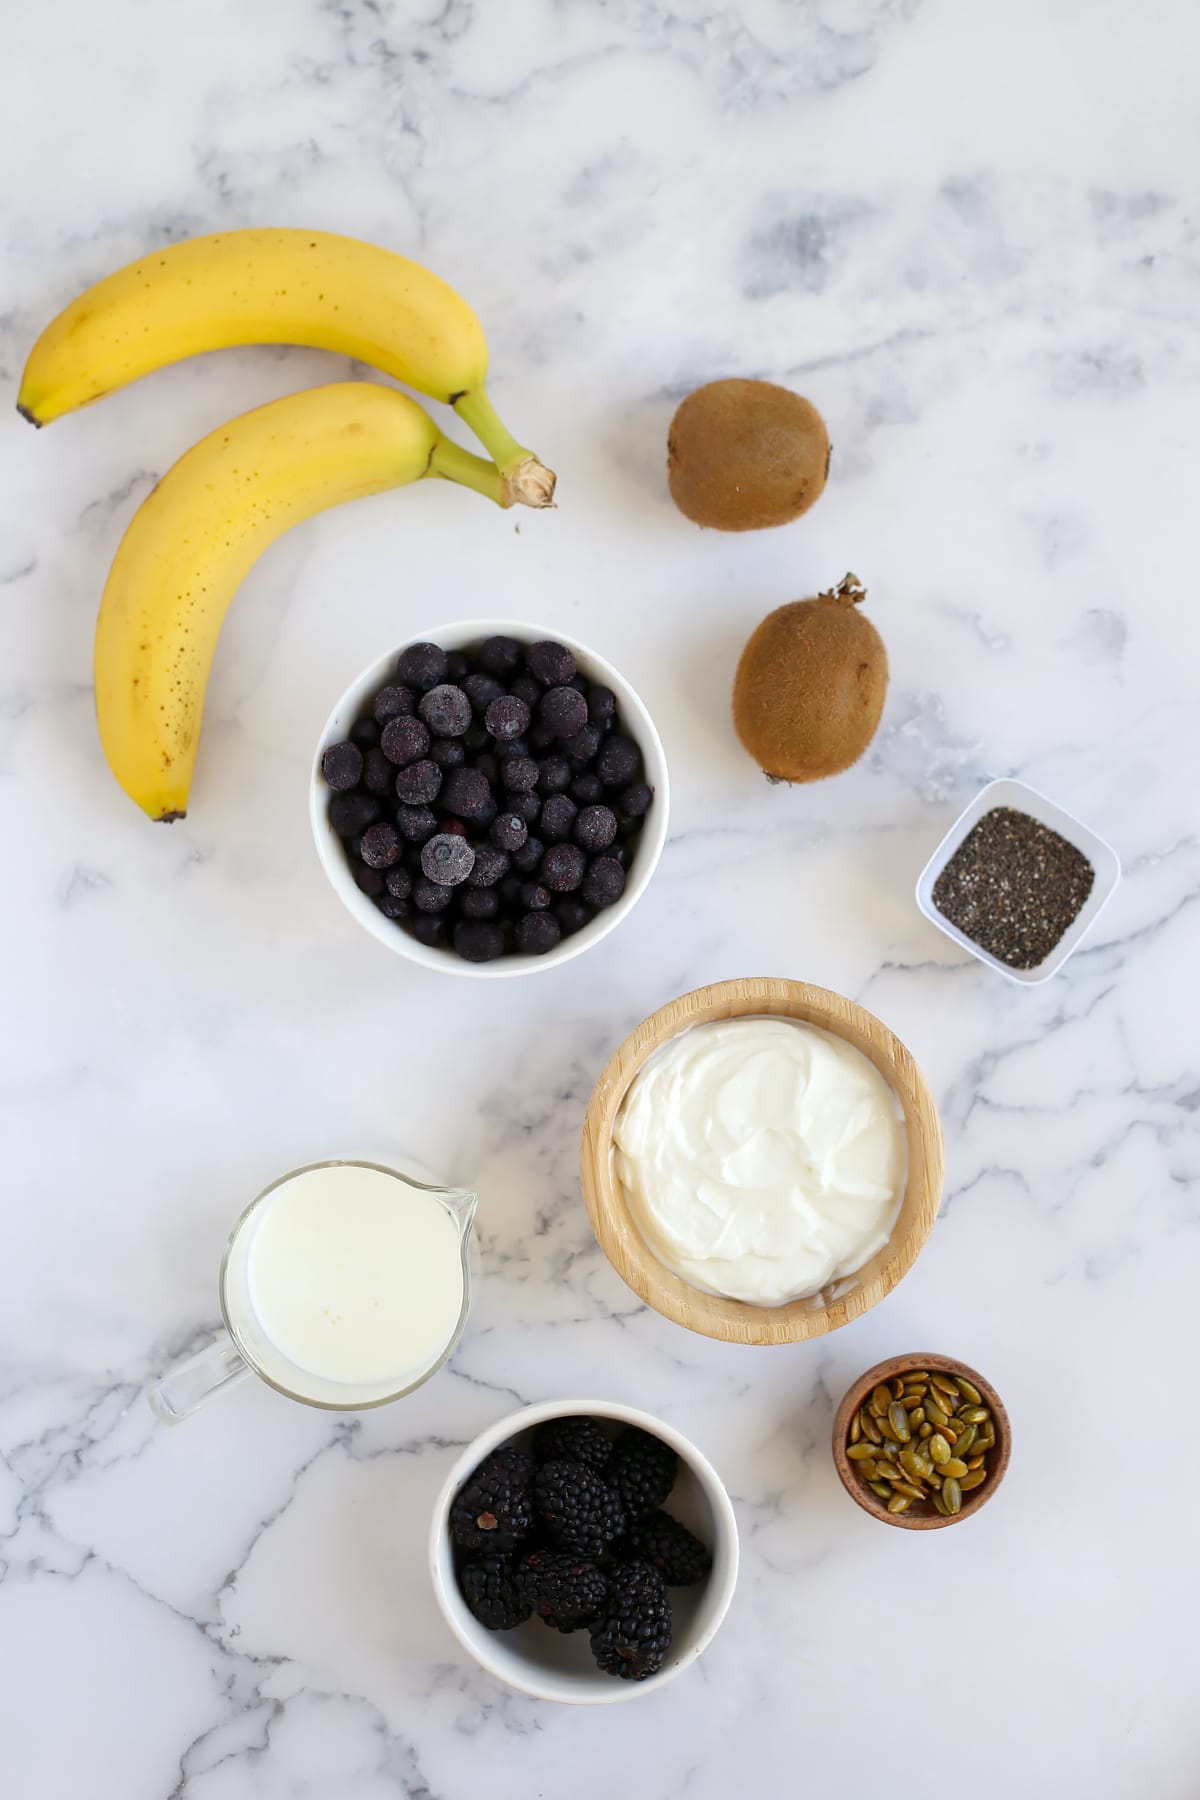 Ingredients you need to make a ،y smoothie bowl.